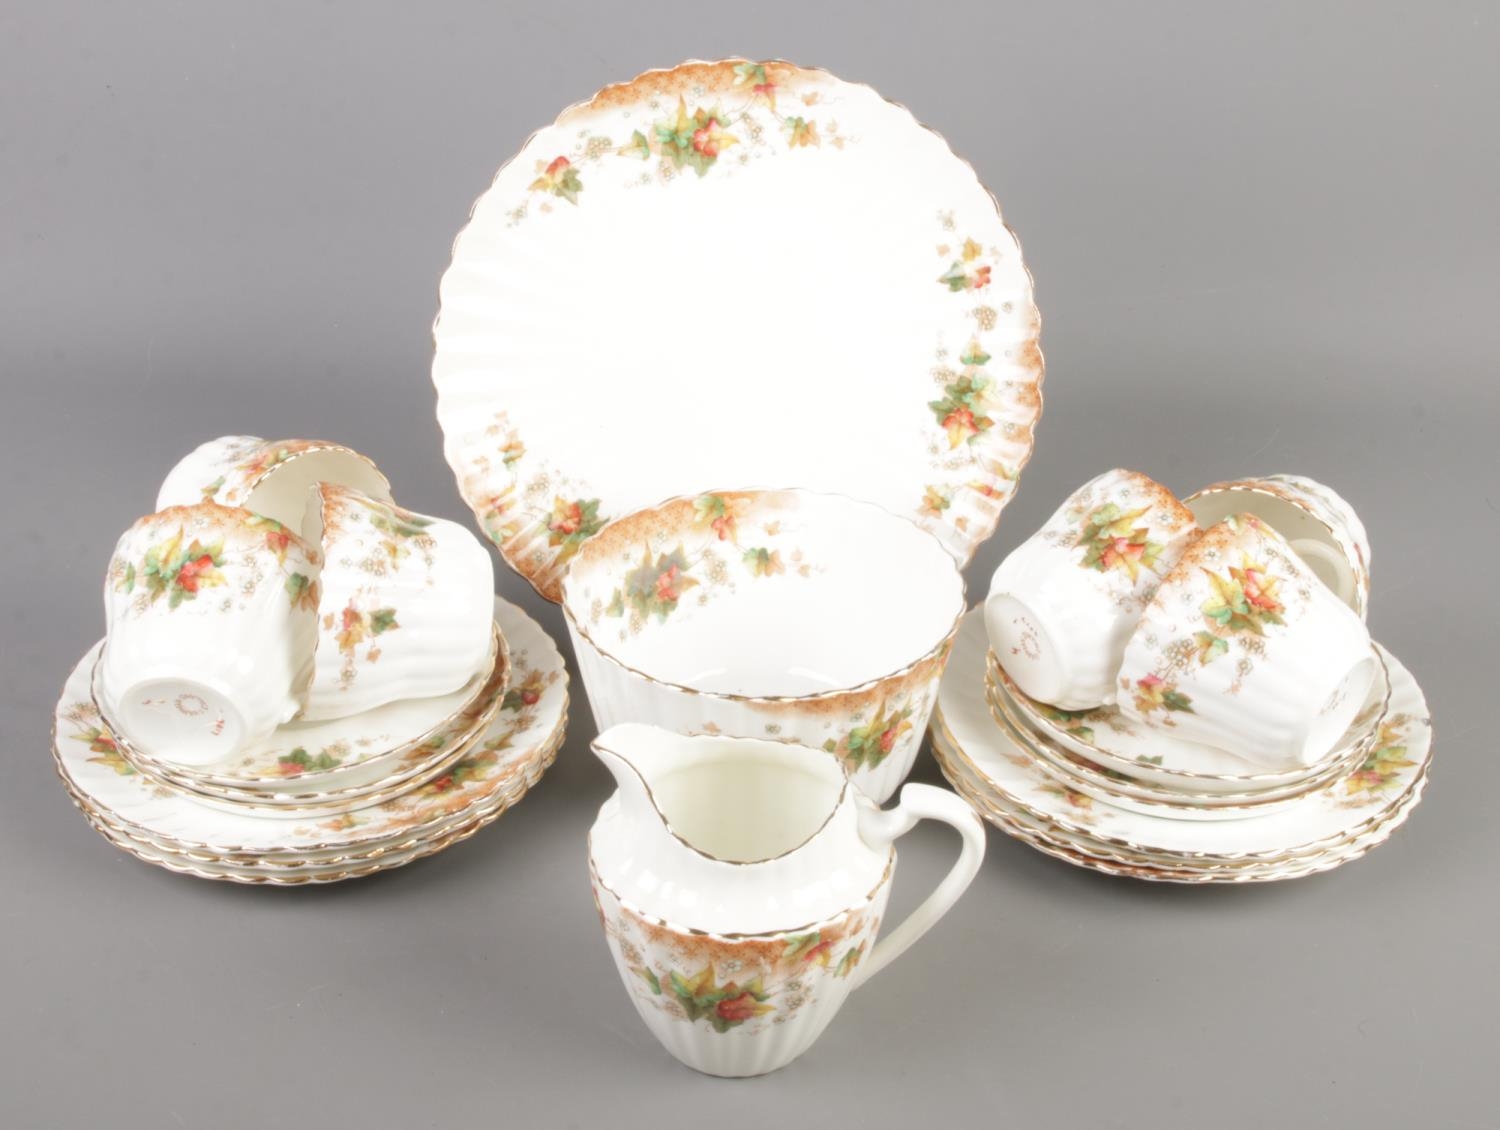 A late Victorian Chapman teaset, decorated with flowers. Minor chips to plates.